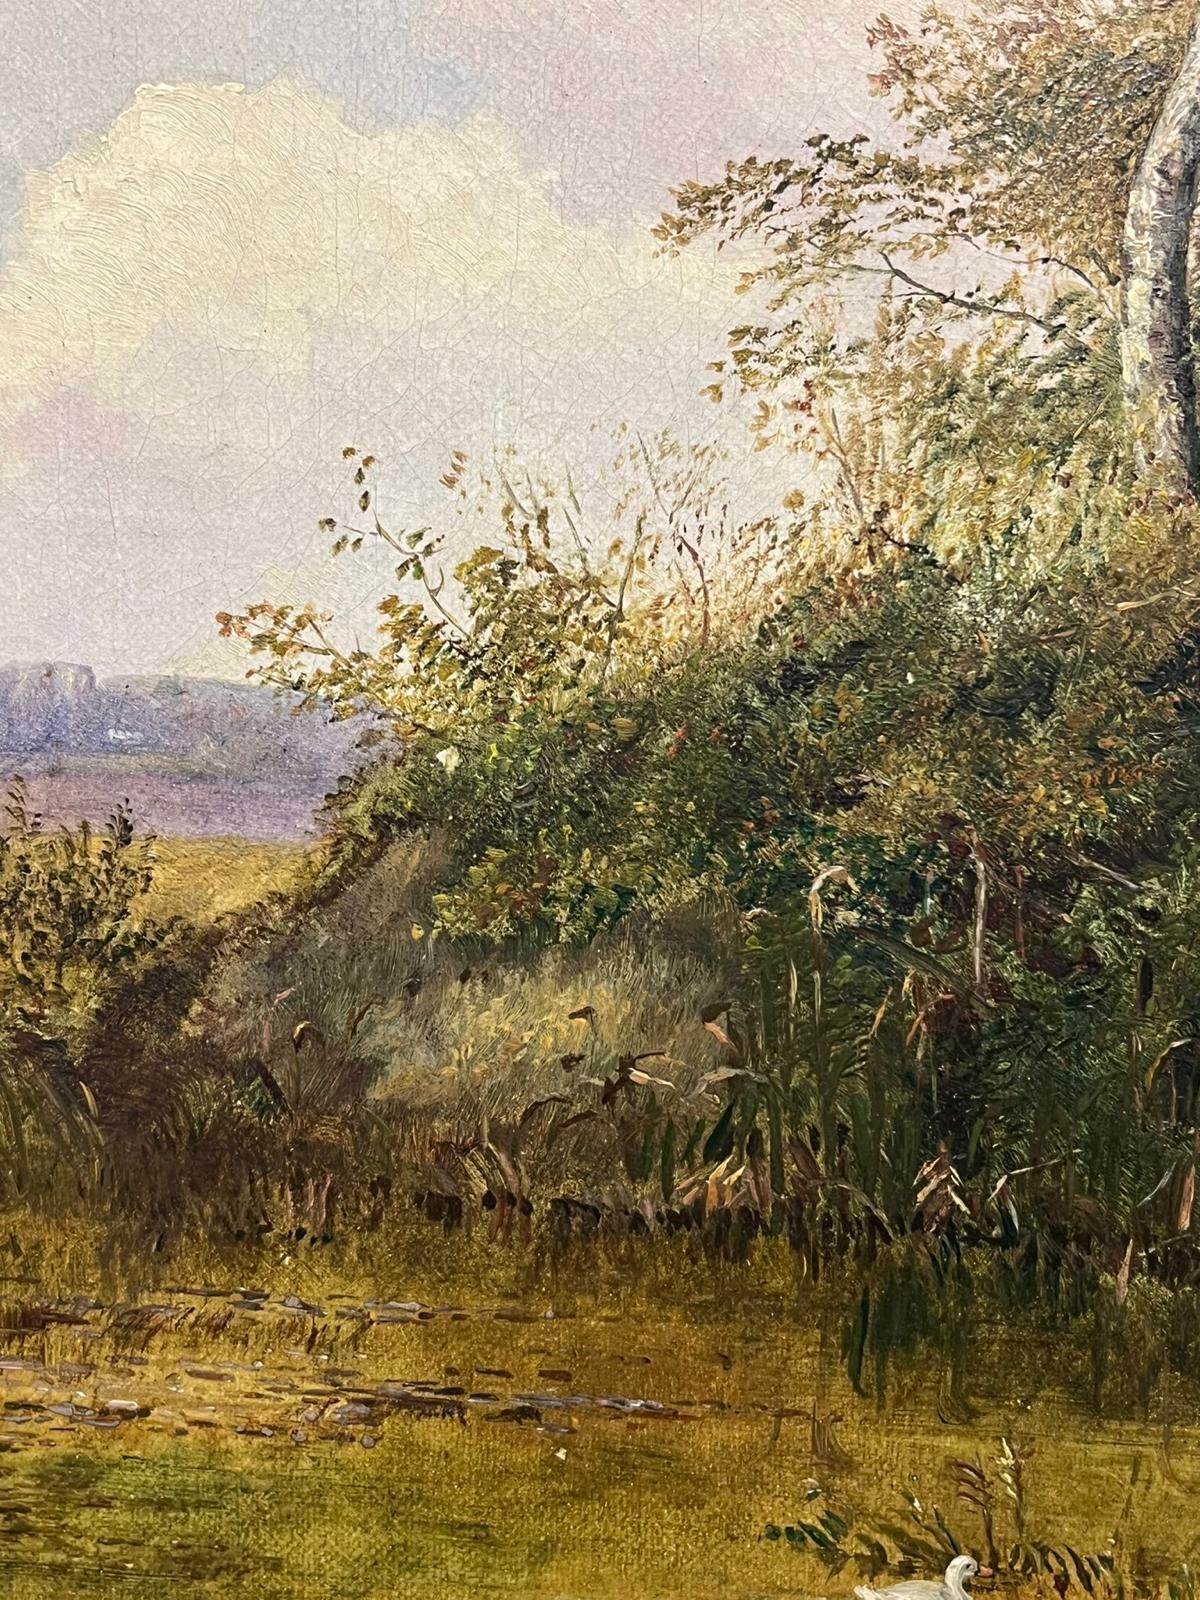 The Village Duck Pond
by W. Cartwright (British exhibited between 1875-1899)
signed and dated 1860's
oil on canvas, framed
framed: 18 x 14.5 inches
canvas: 15.5 x 12 inches
provenance: private collection, England
condition: very good and sound